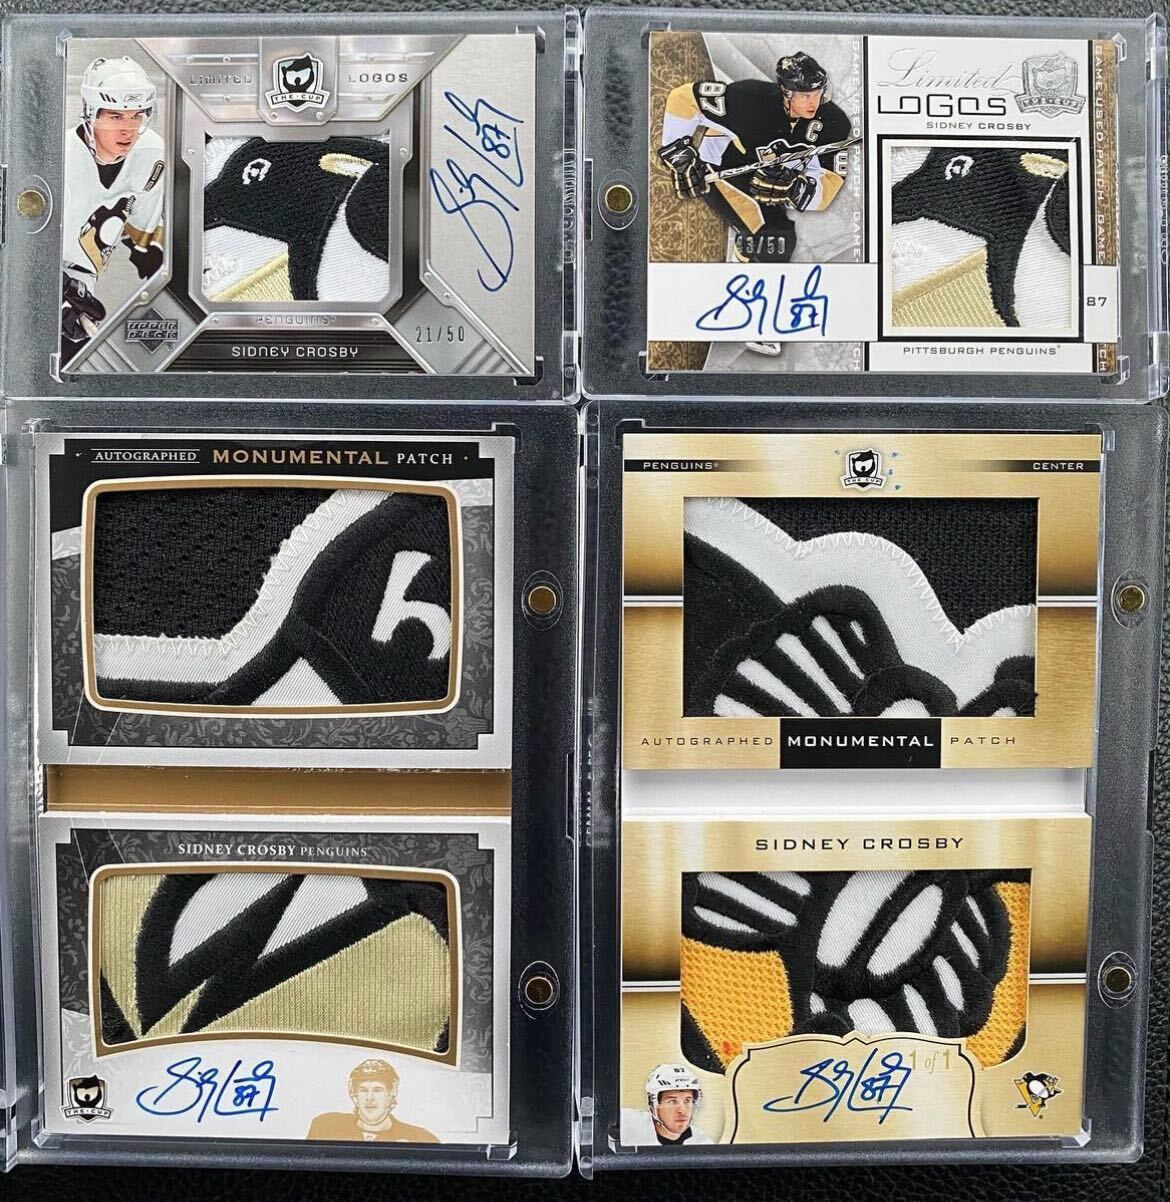 Introduction to Hockey Card Collecting